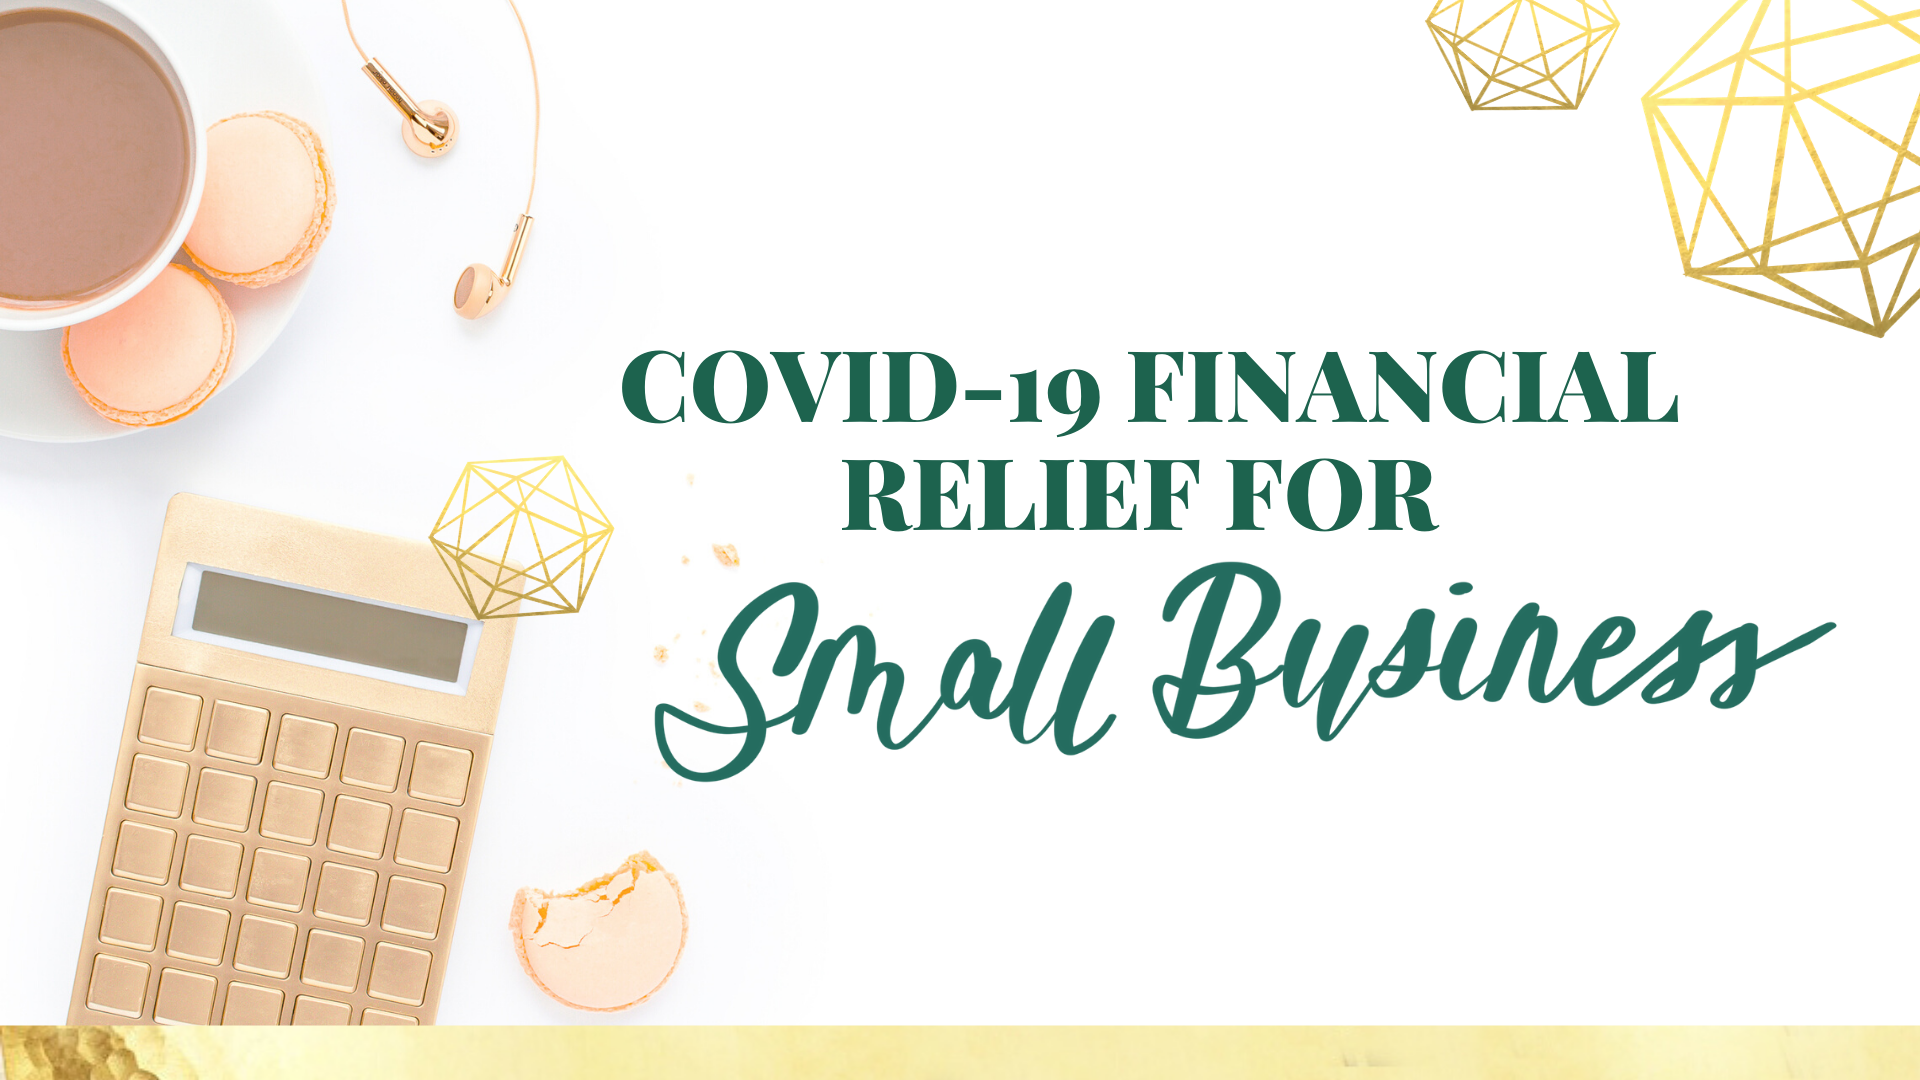 COVID-19 financial relief for small business